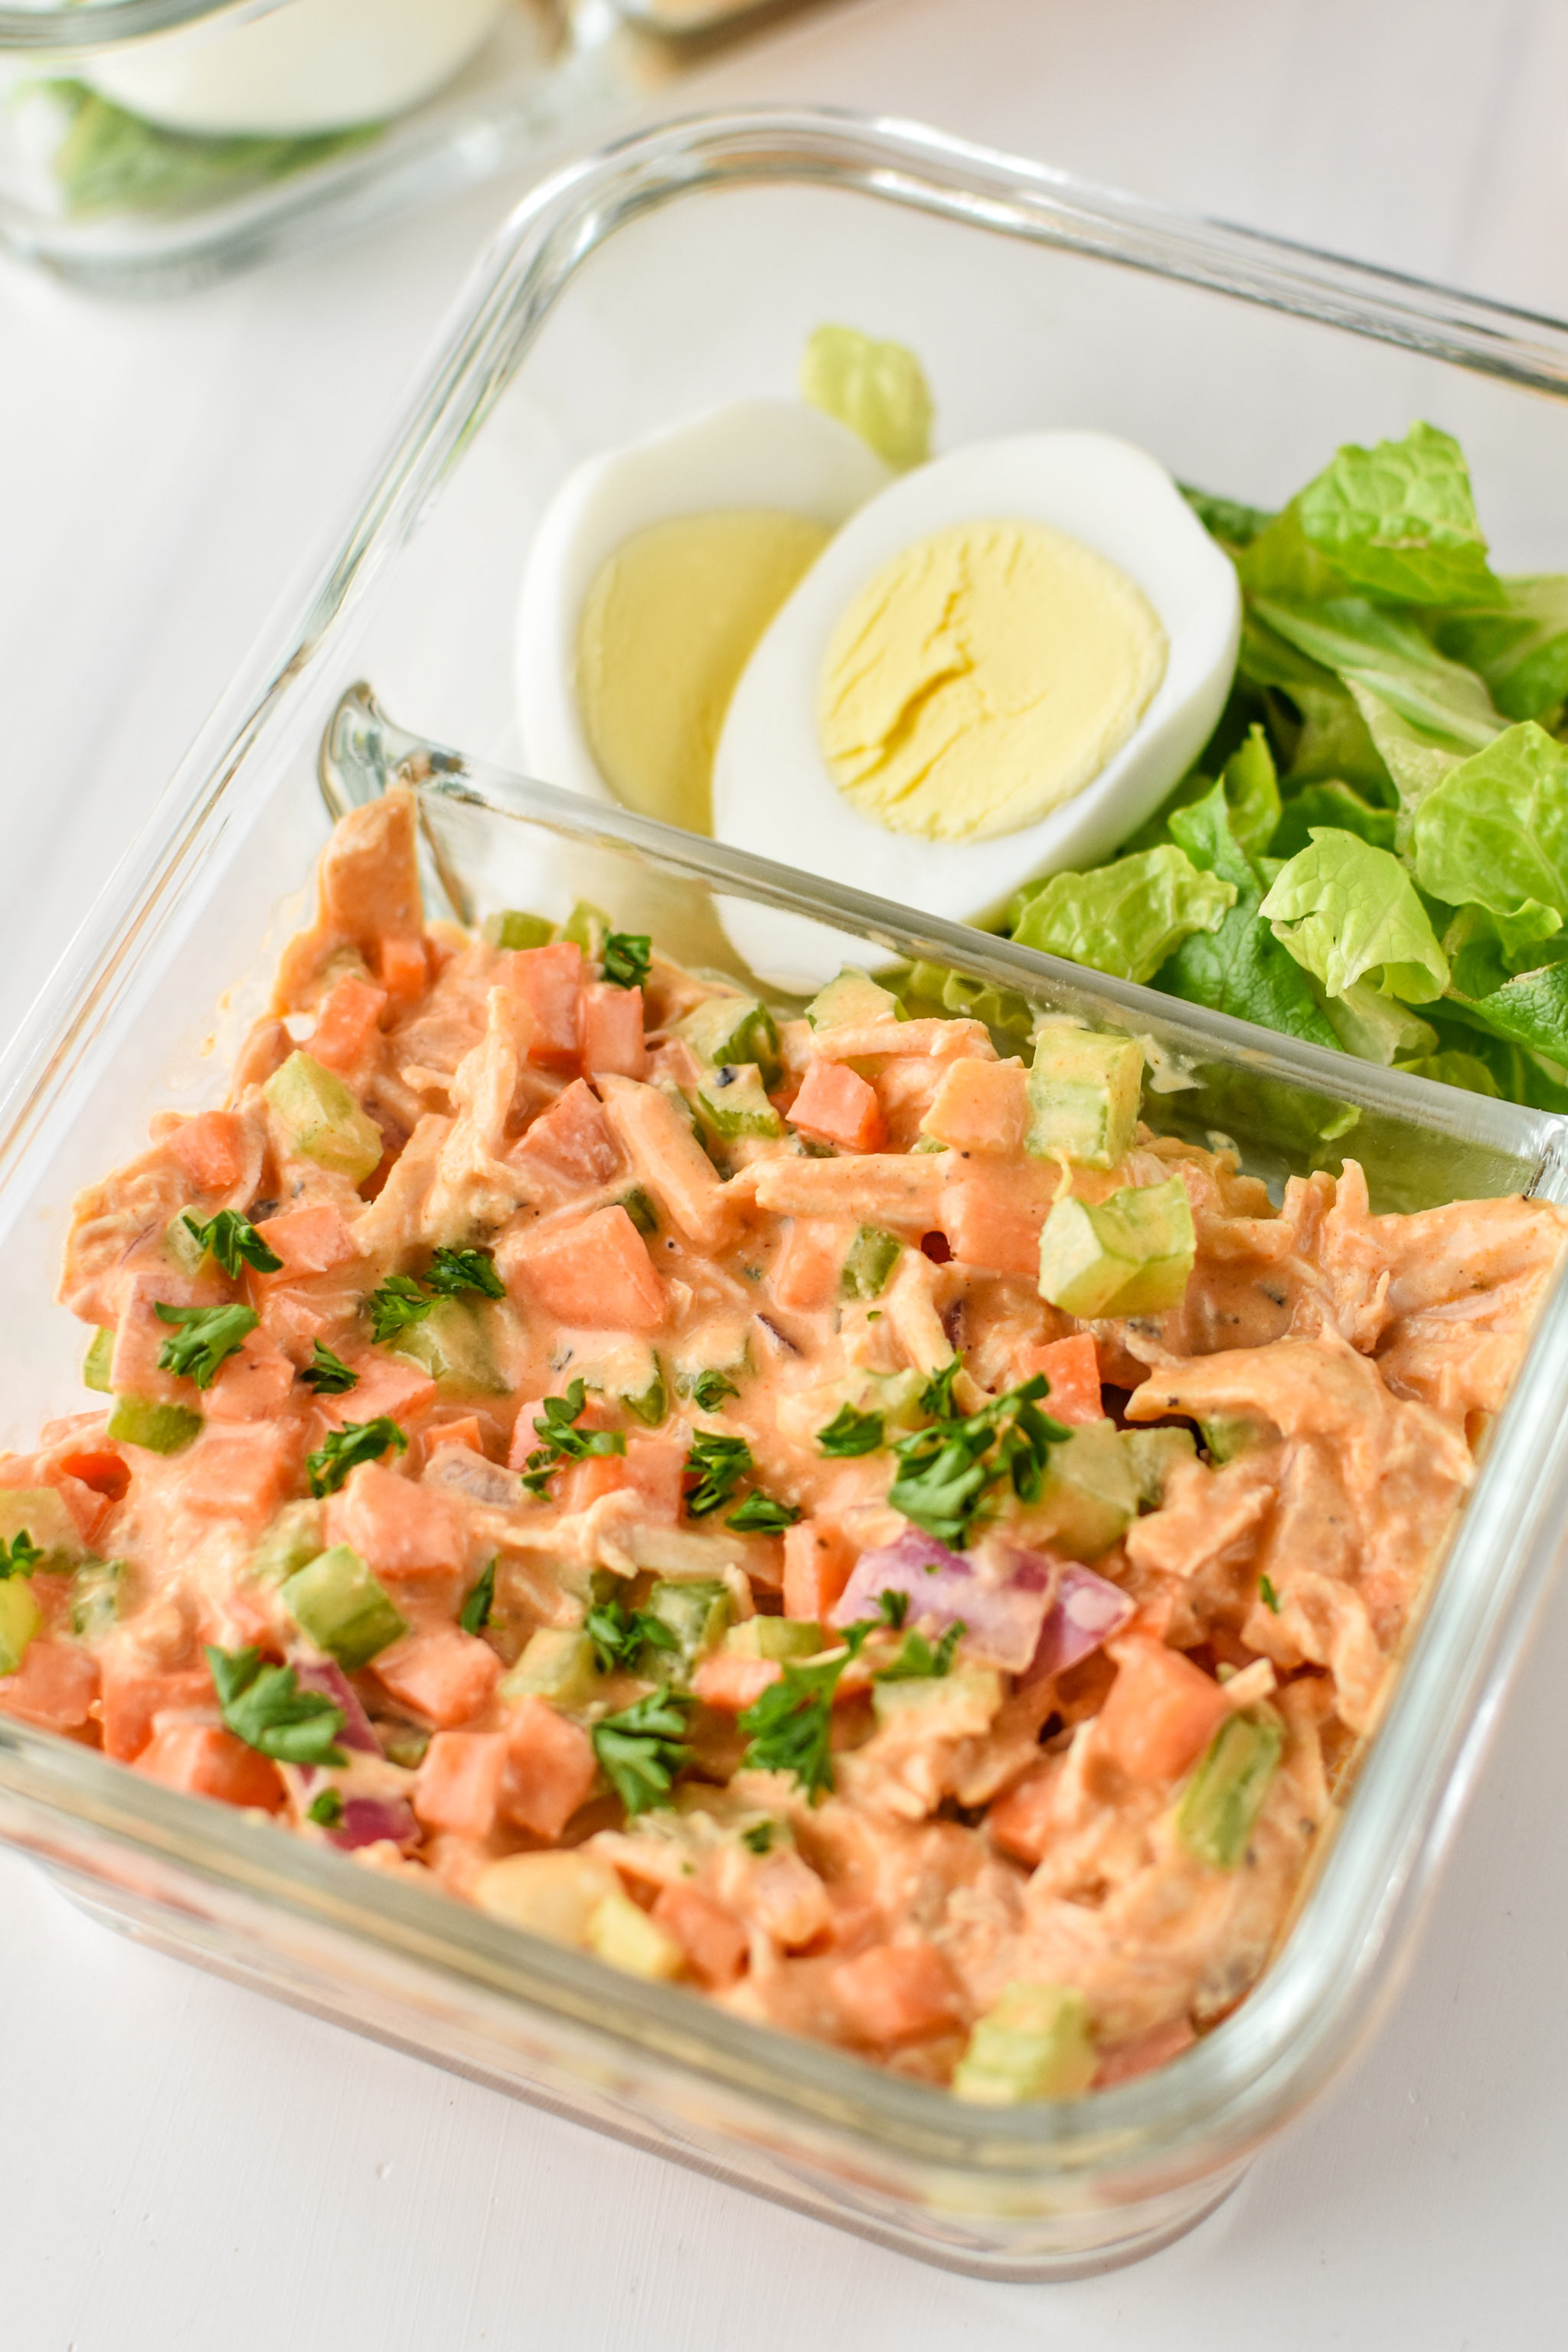 Easy Buffalo Chicken Salad meal prepped with a hard boiled egg and chopped romaine